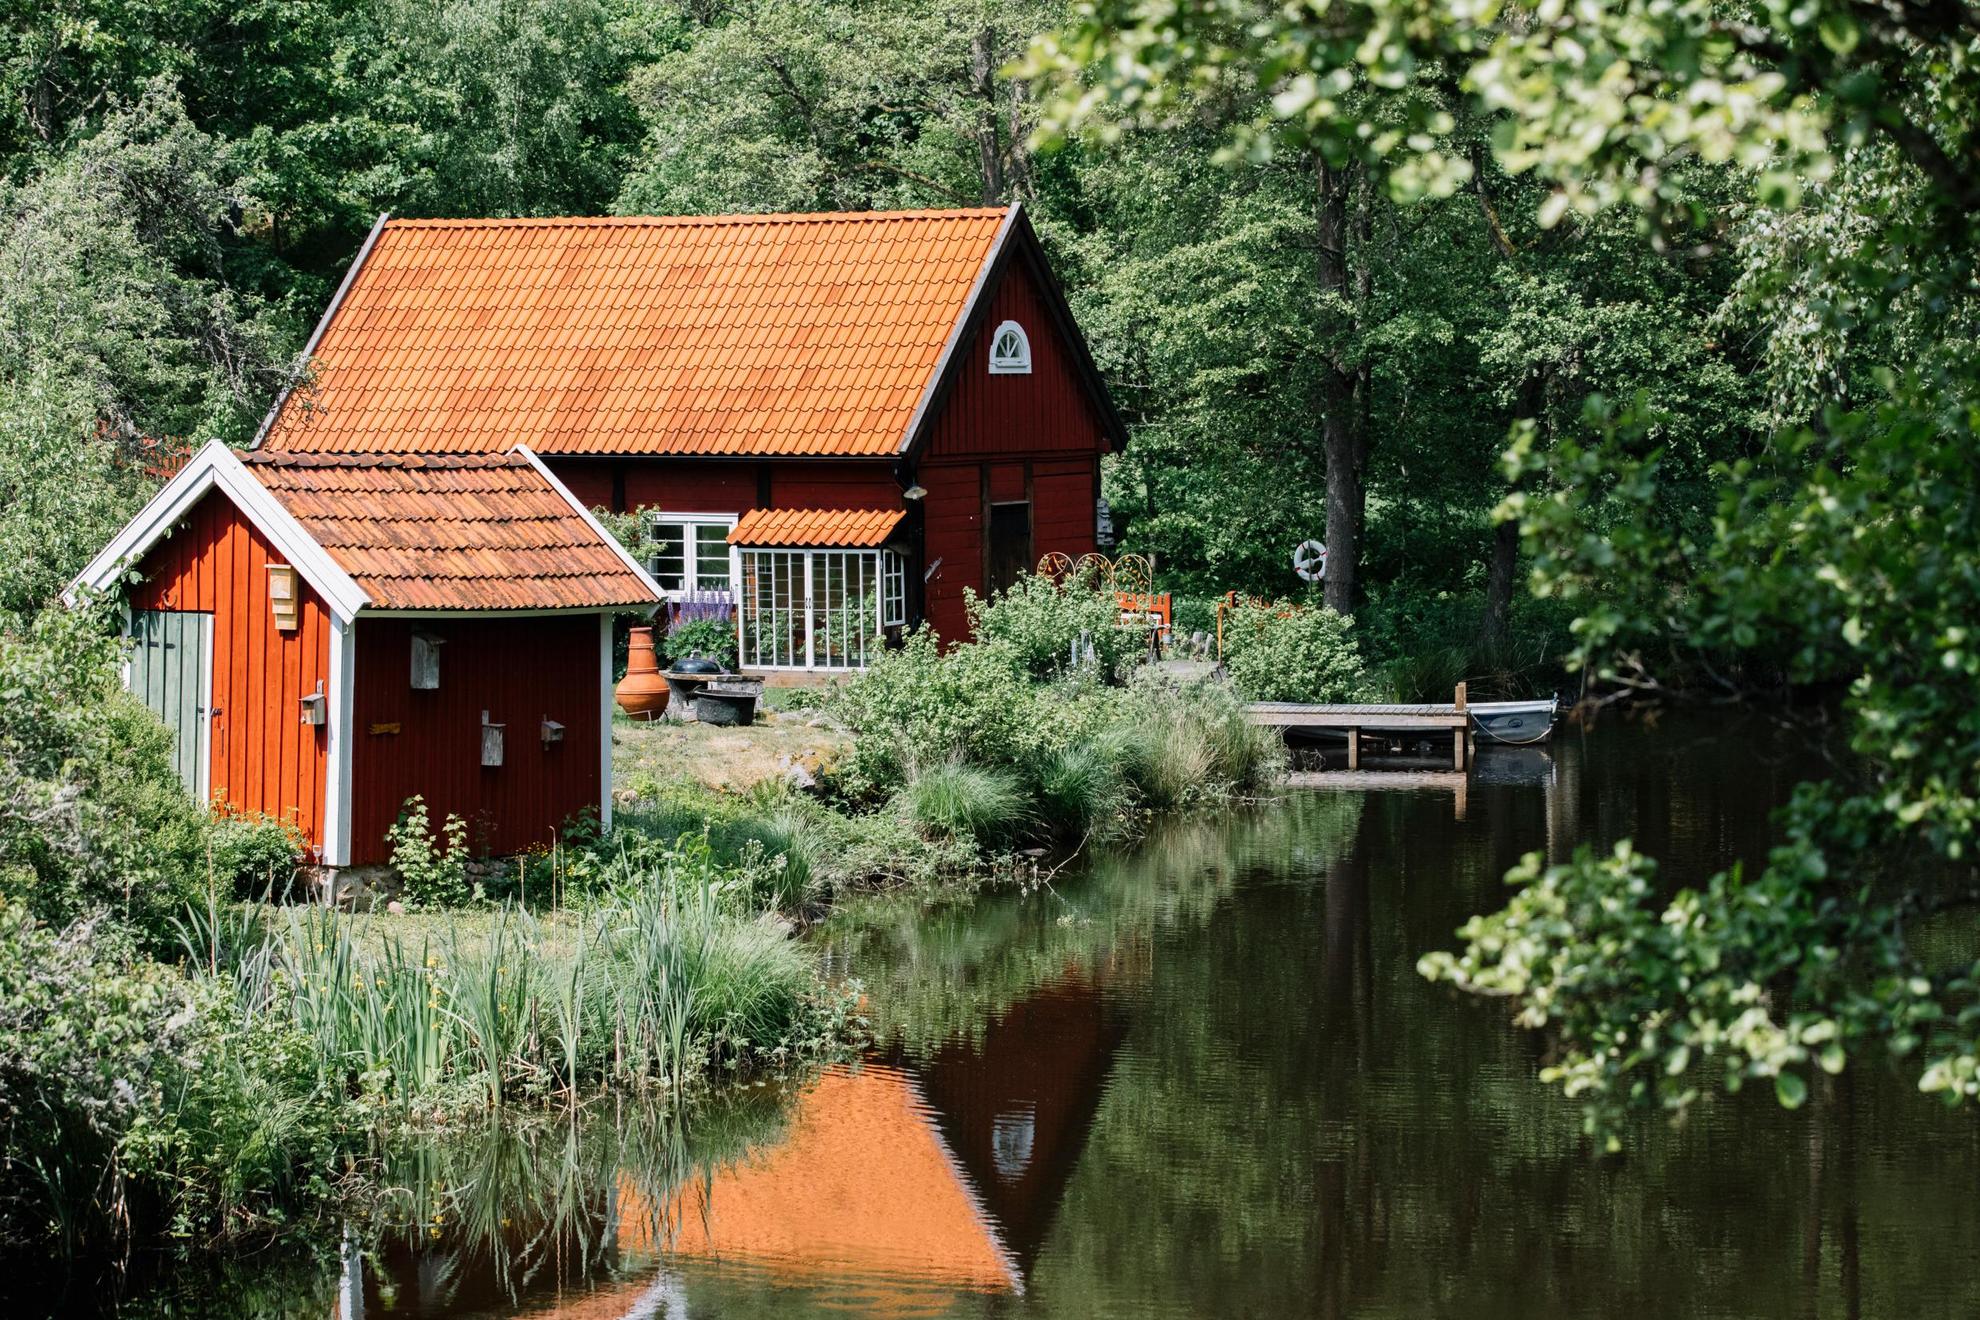 Next to a lake with lush forest around, there's a traditional red cottage and a small red guest house.